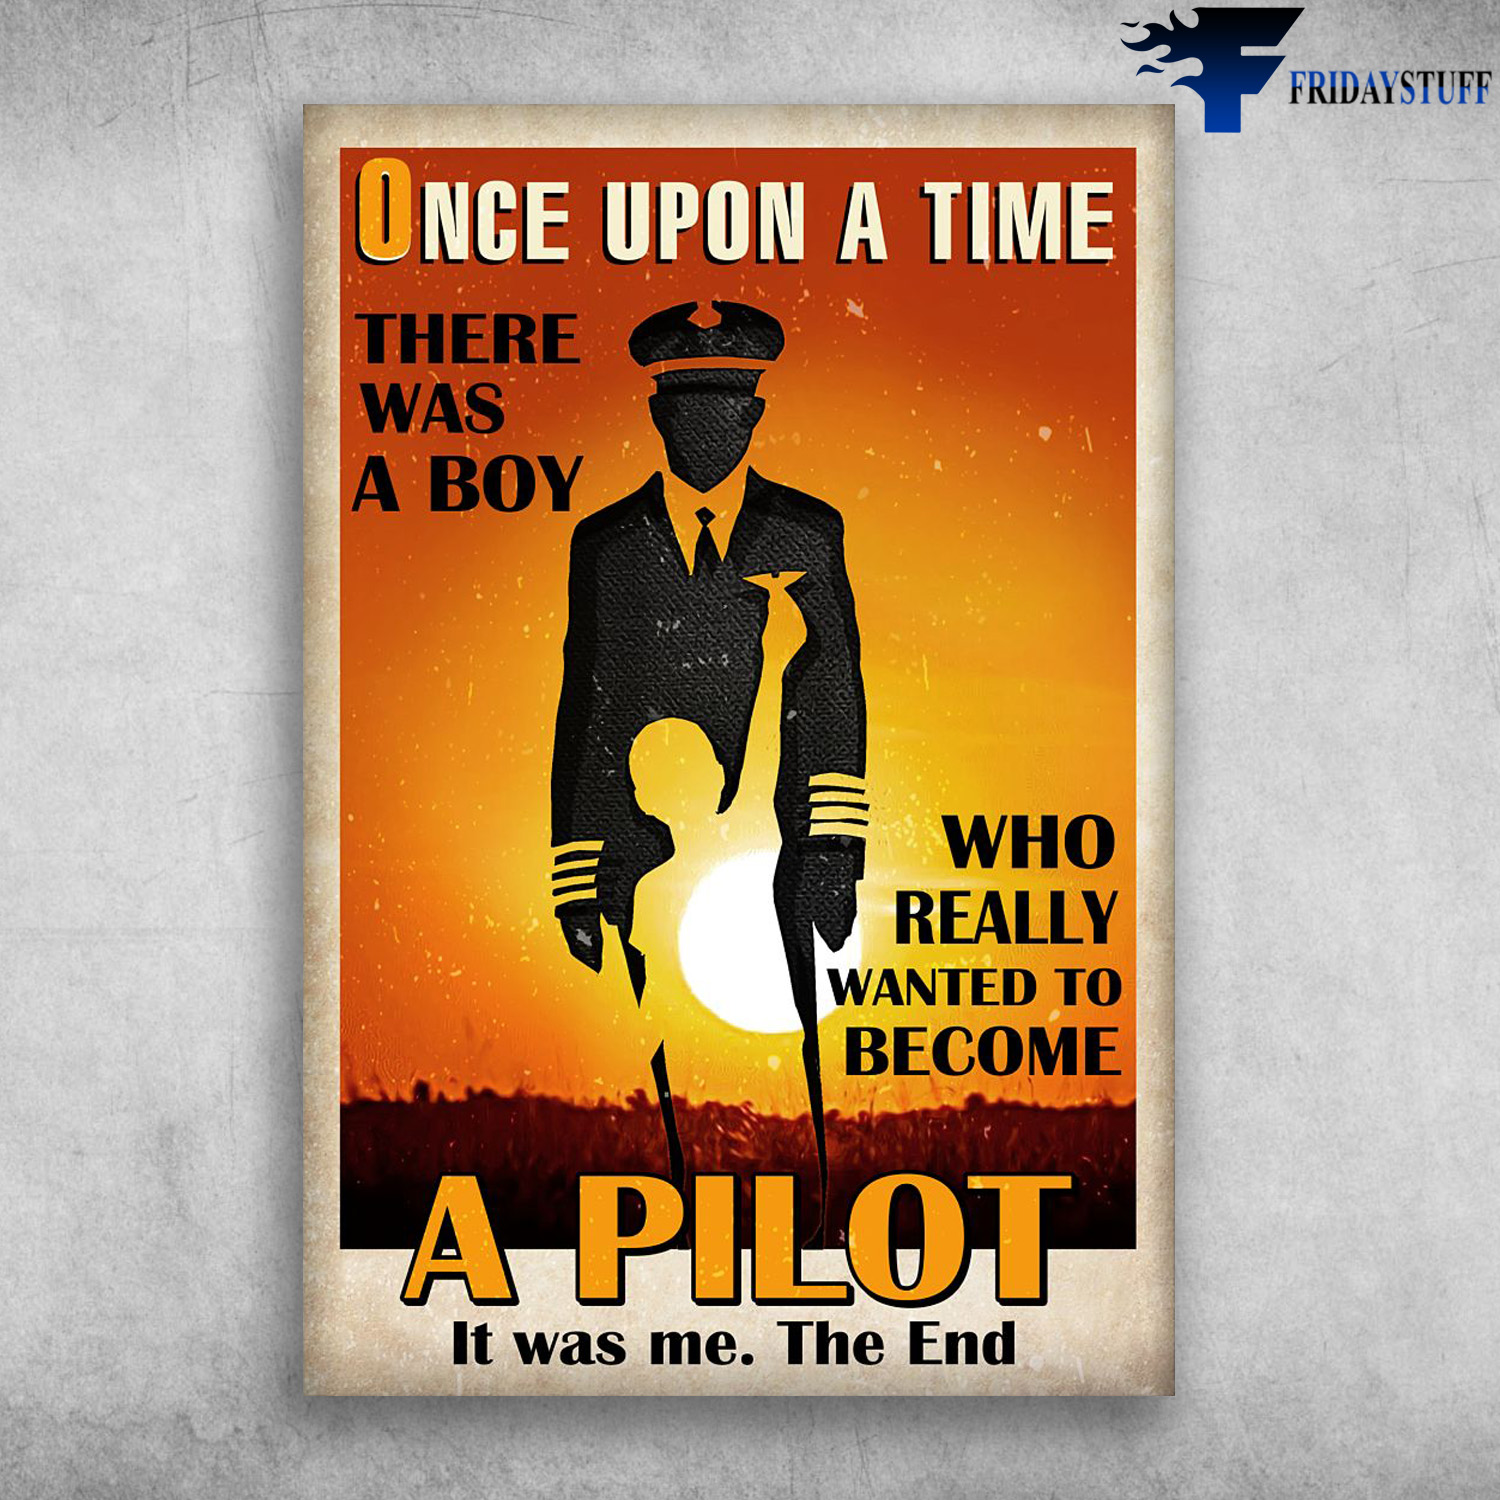 Boy Want To Become Pilot - Once Upon A Time, There Was A Boy, Who Really Wanted To Become A Pilot, It Was Me, The End